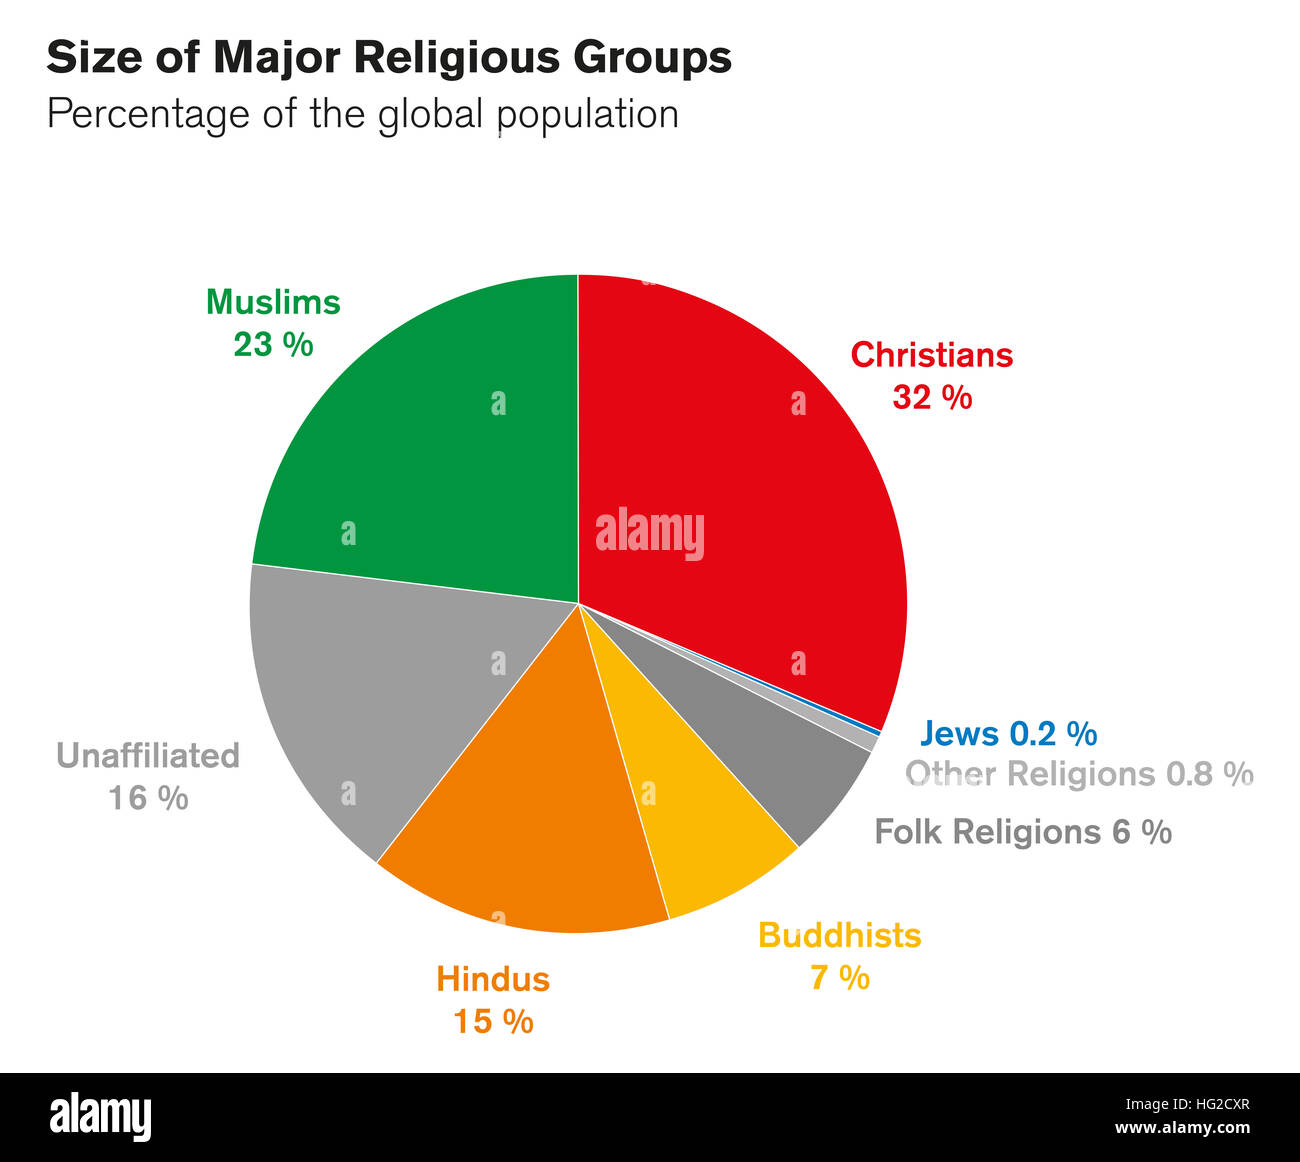 Sizes of major religious groups. Pie chart. Percentages of global